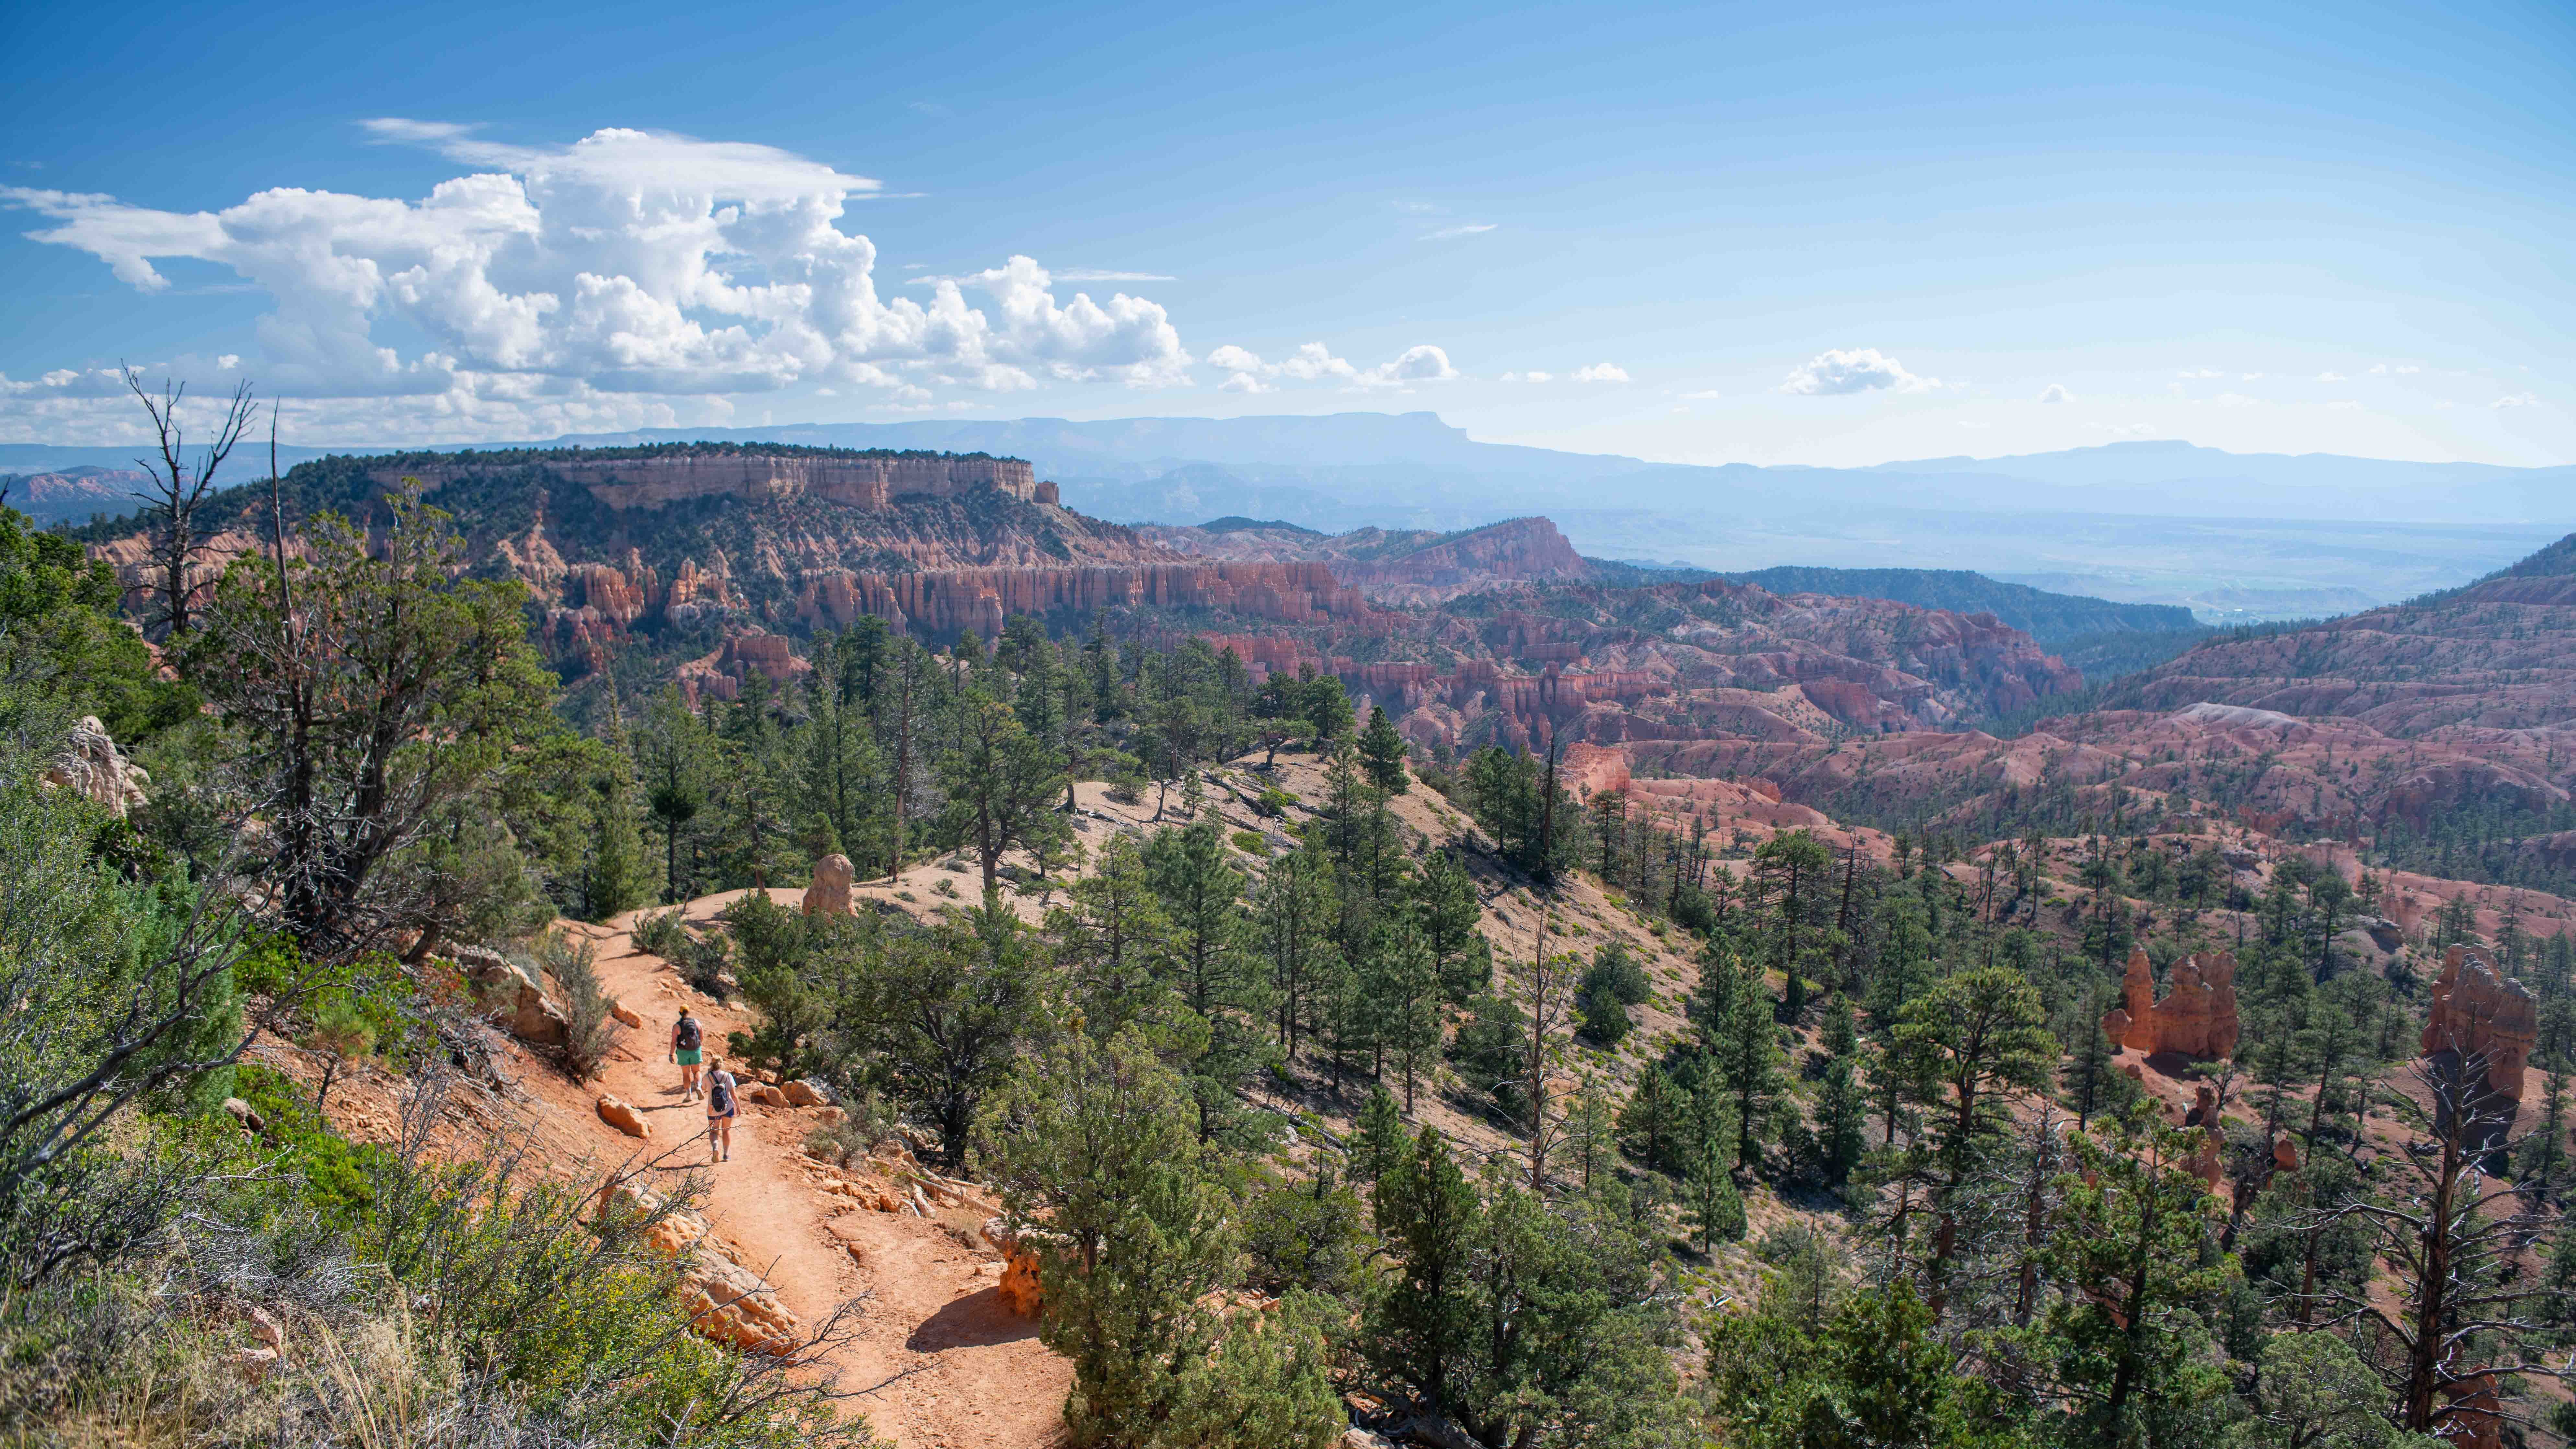 Fairyland Loop in Bryce Canyon National Park. A woman was found deceased after a hike....